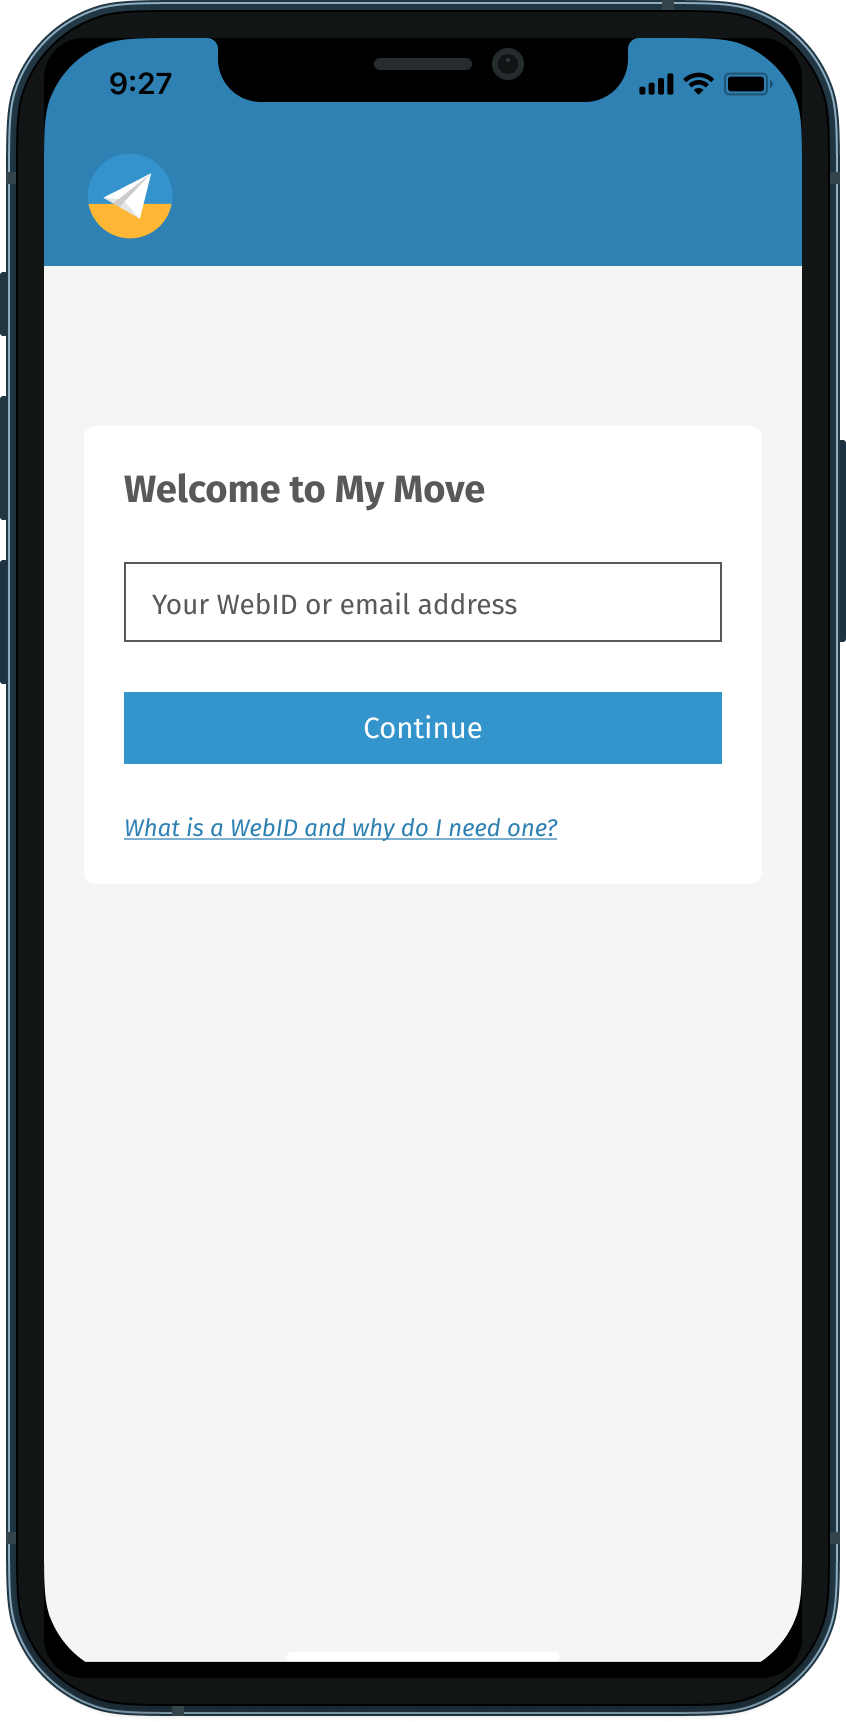 The first screen of the My Move onboarding journey. Here, enabling the user to enter an email address or WebID in the same input field helps to improve conversion.